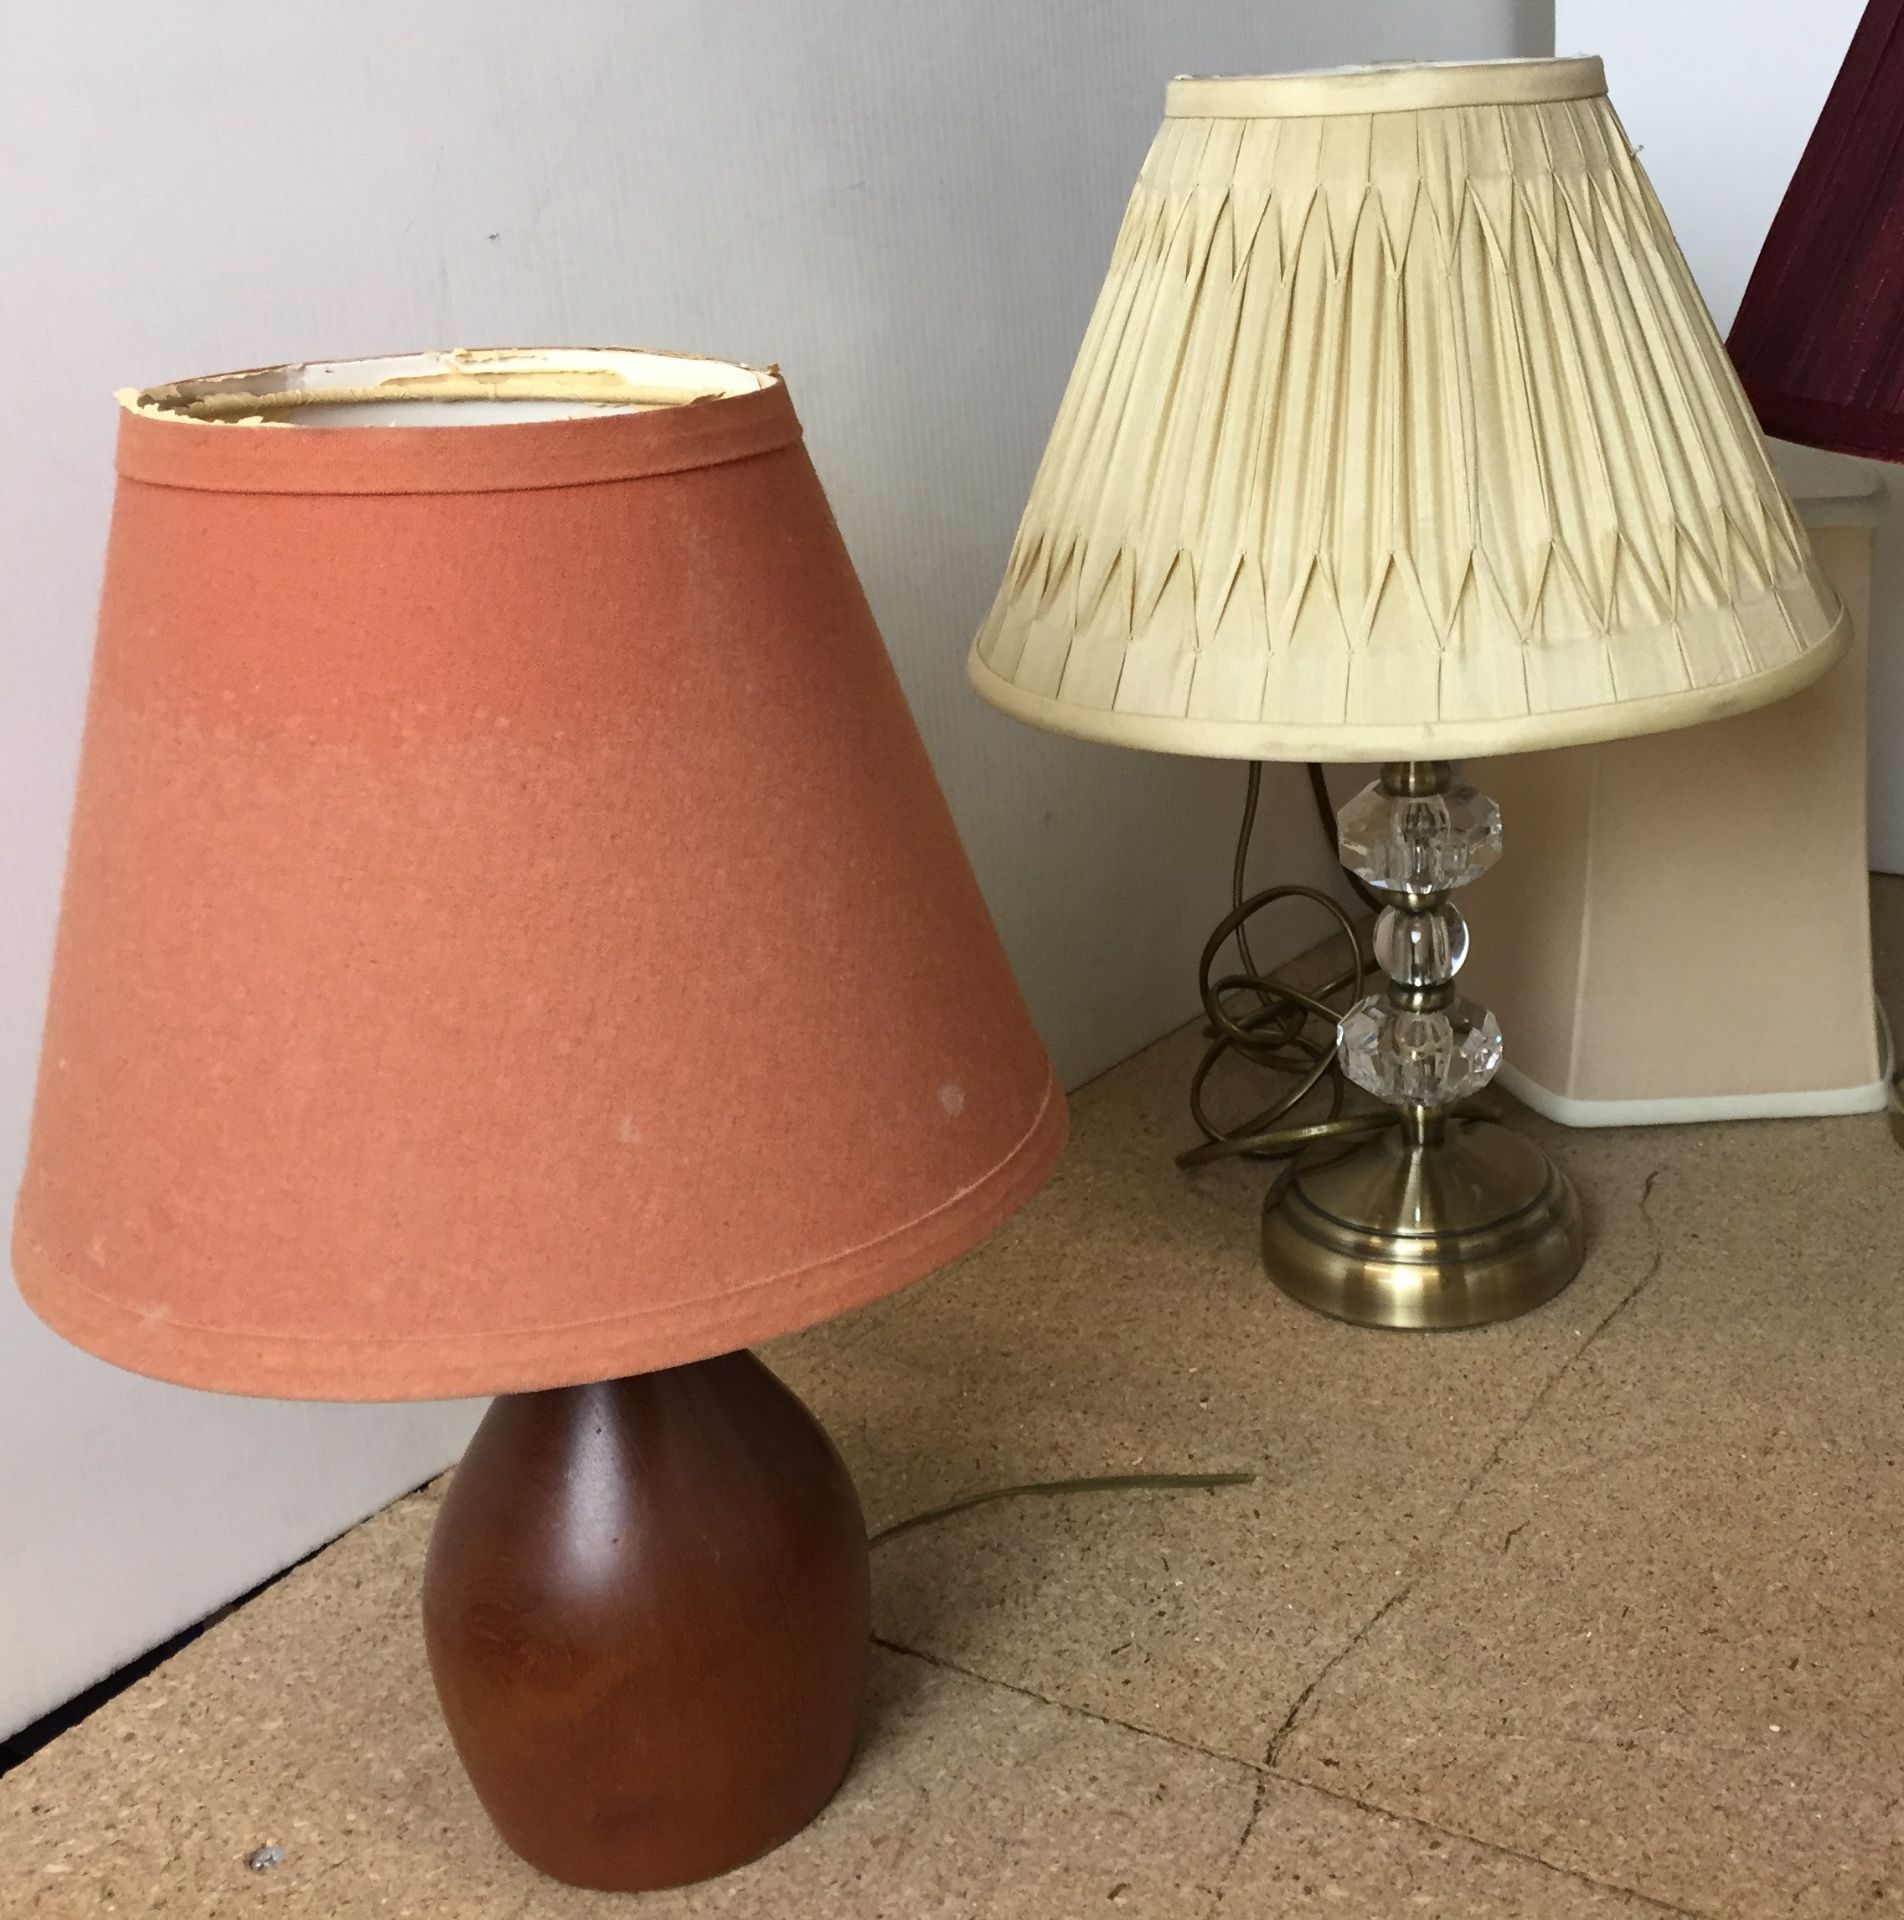 Five table lamps and shades (orange shade damaged) including Imari patterned, brass and glass, - Image 2 of 3